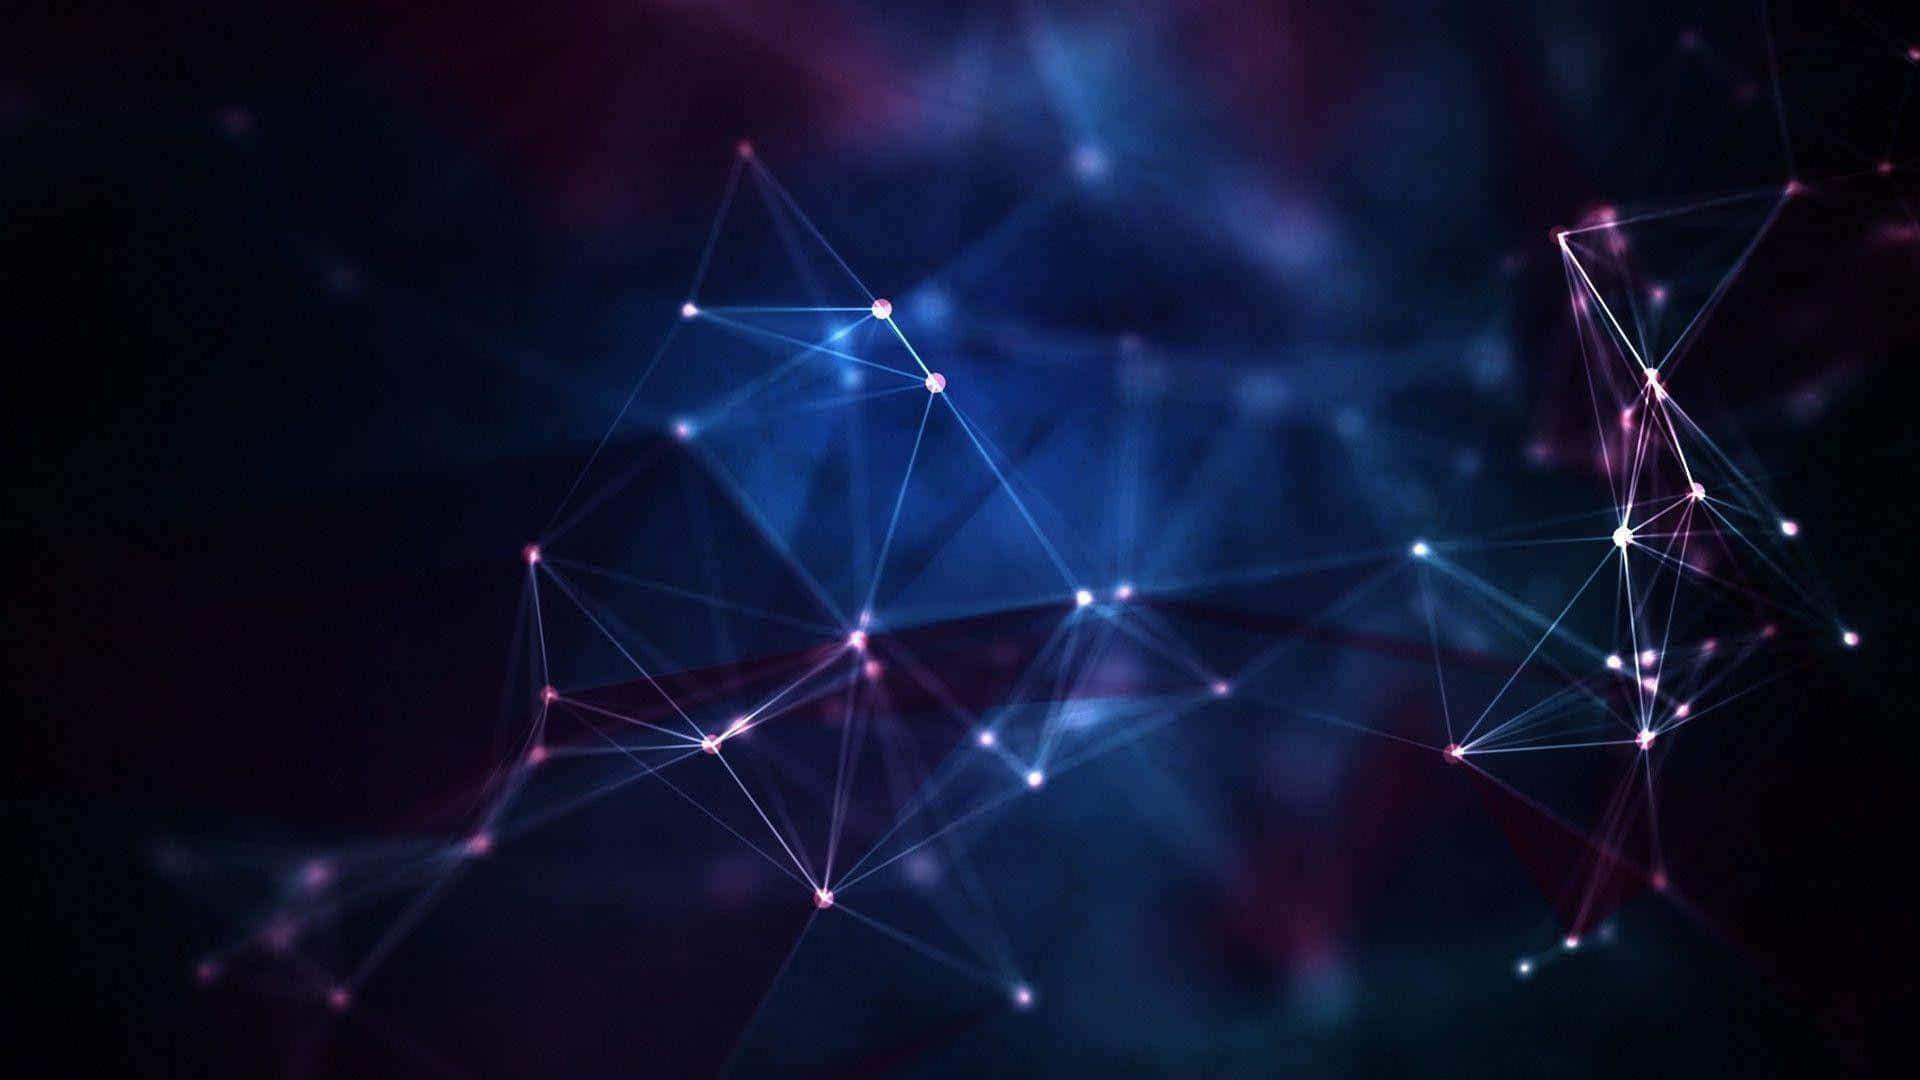 Abstract Network Connections Background Wallpaper